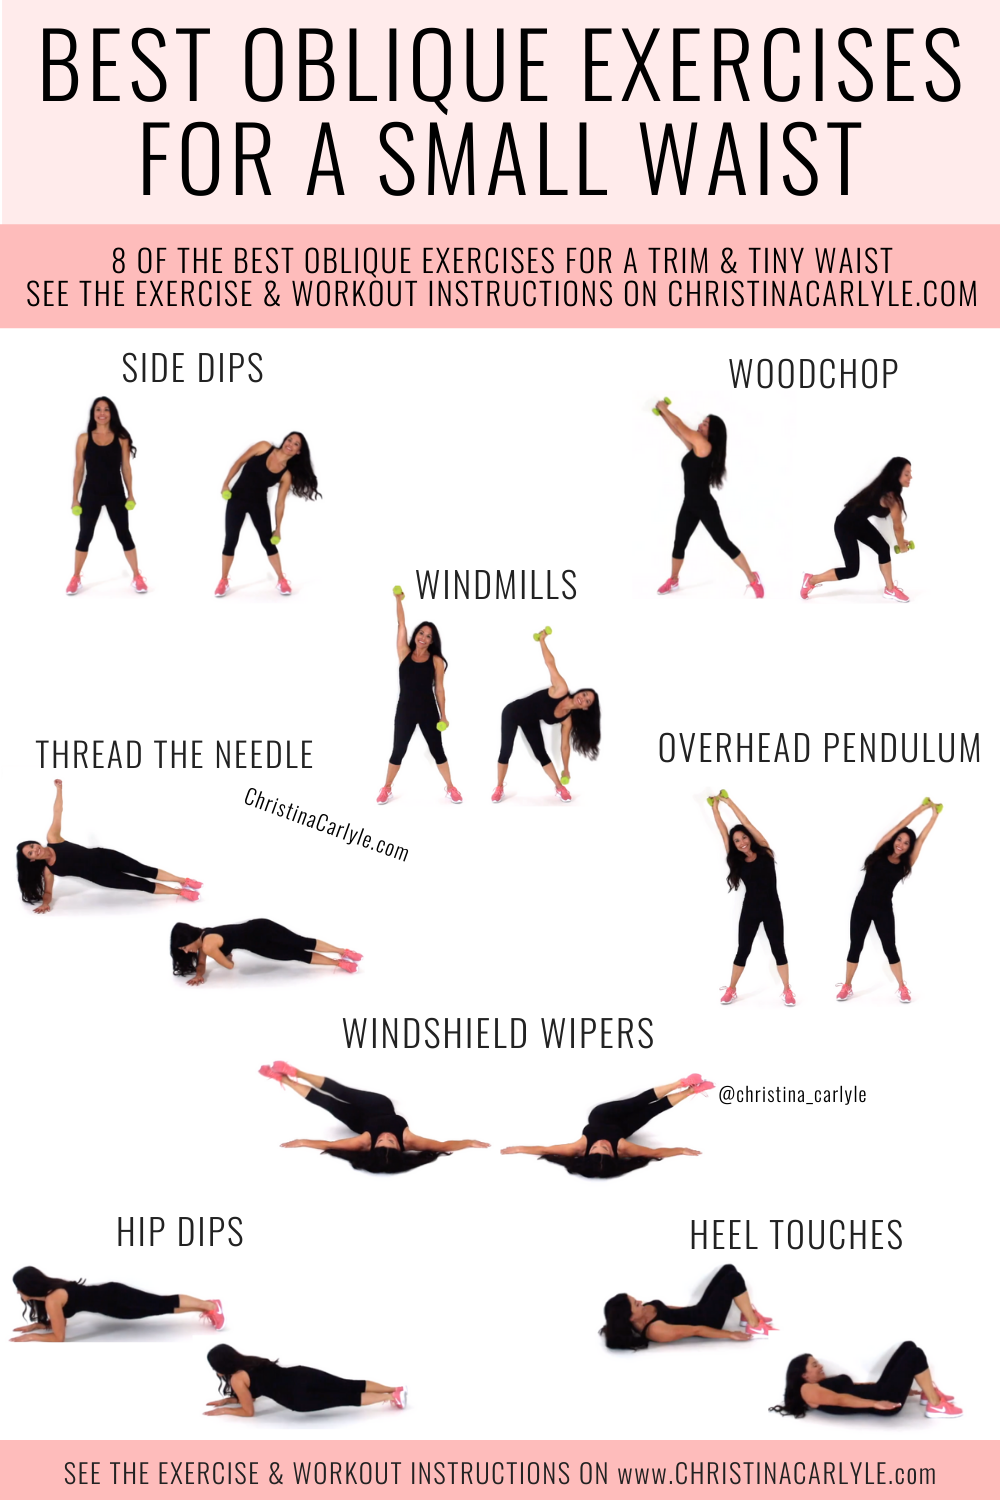 https://www.christinacarlyle.com/wp-content/uploads/2022/04/Oblique-Workout-Christina-Carlyle.png